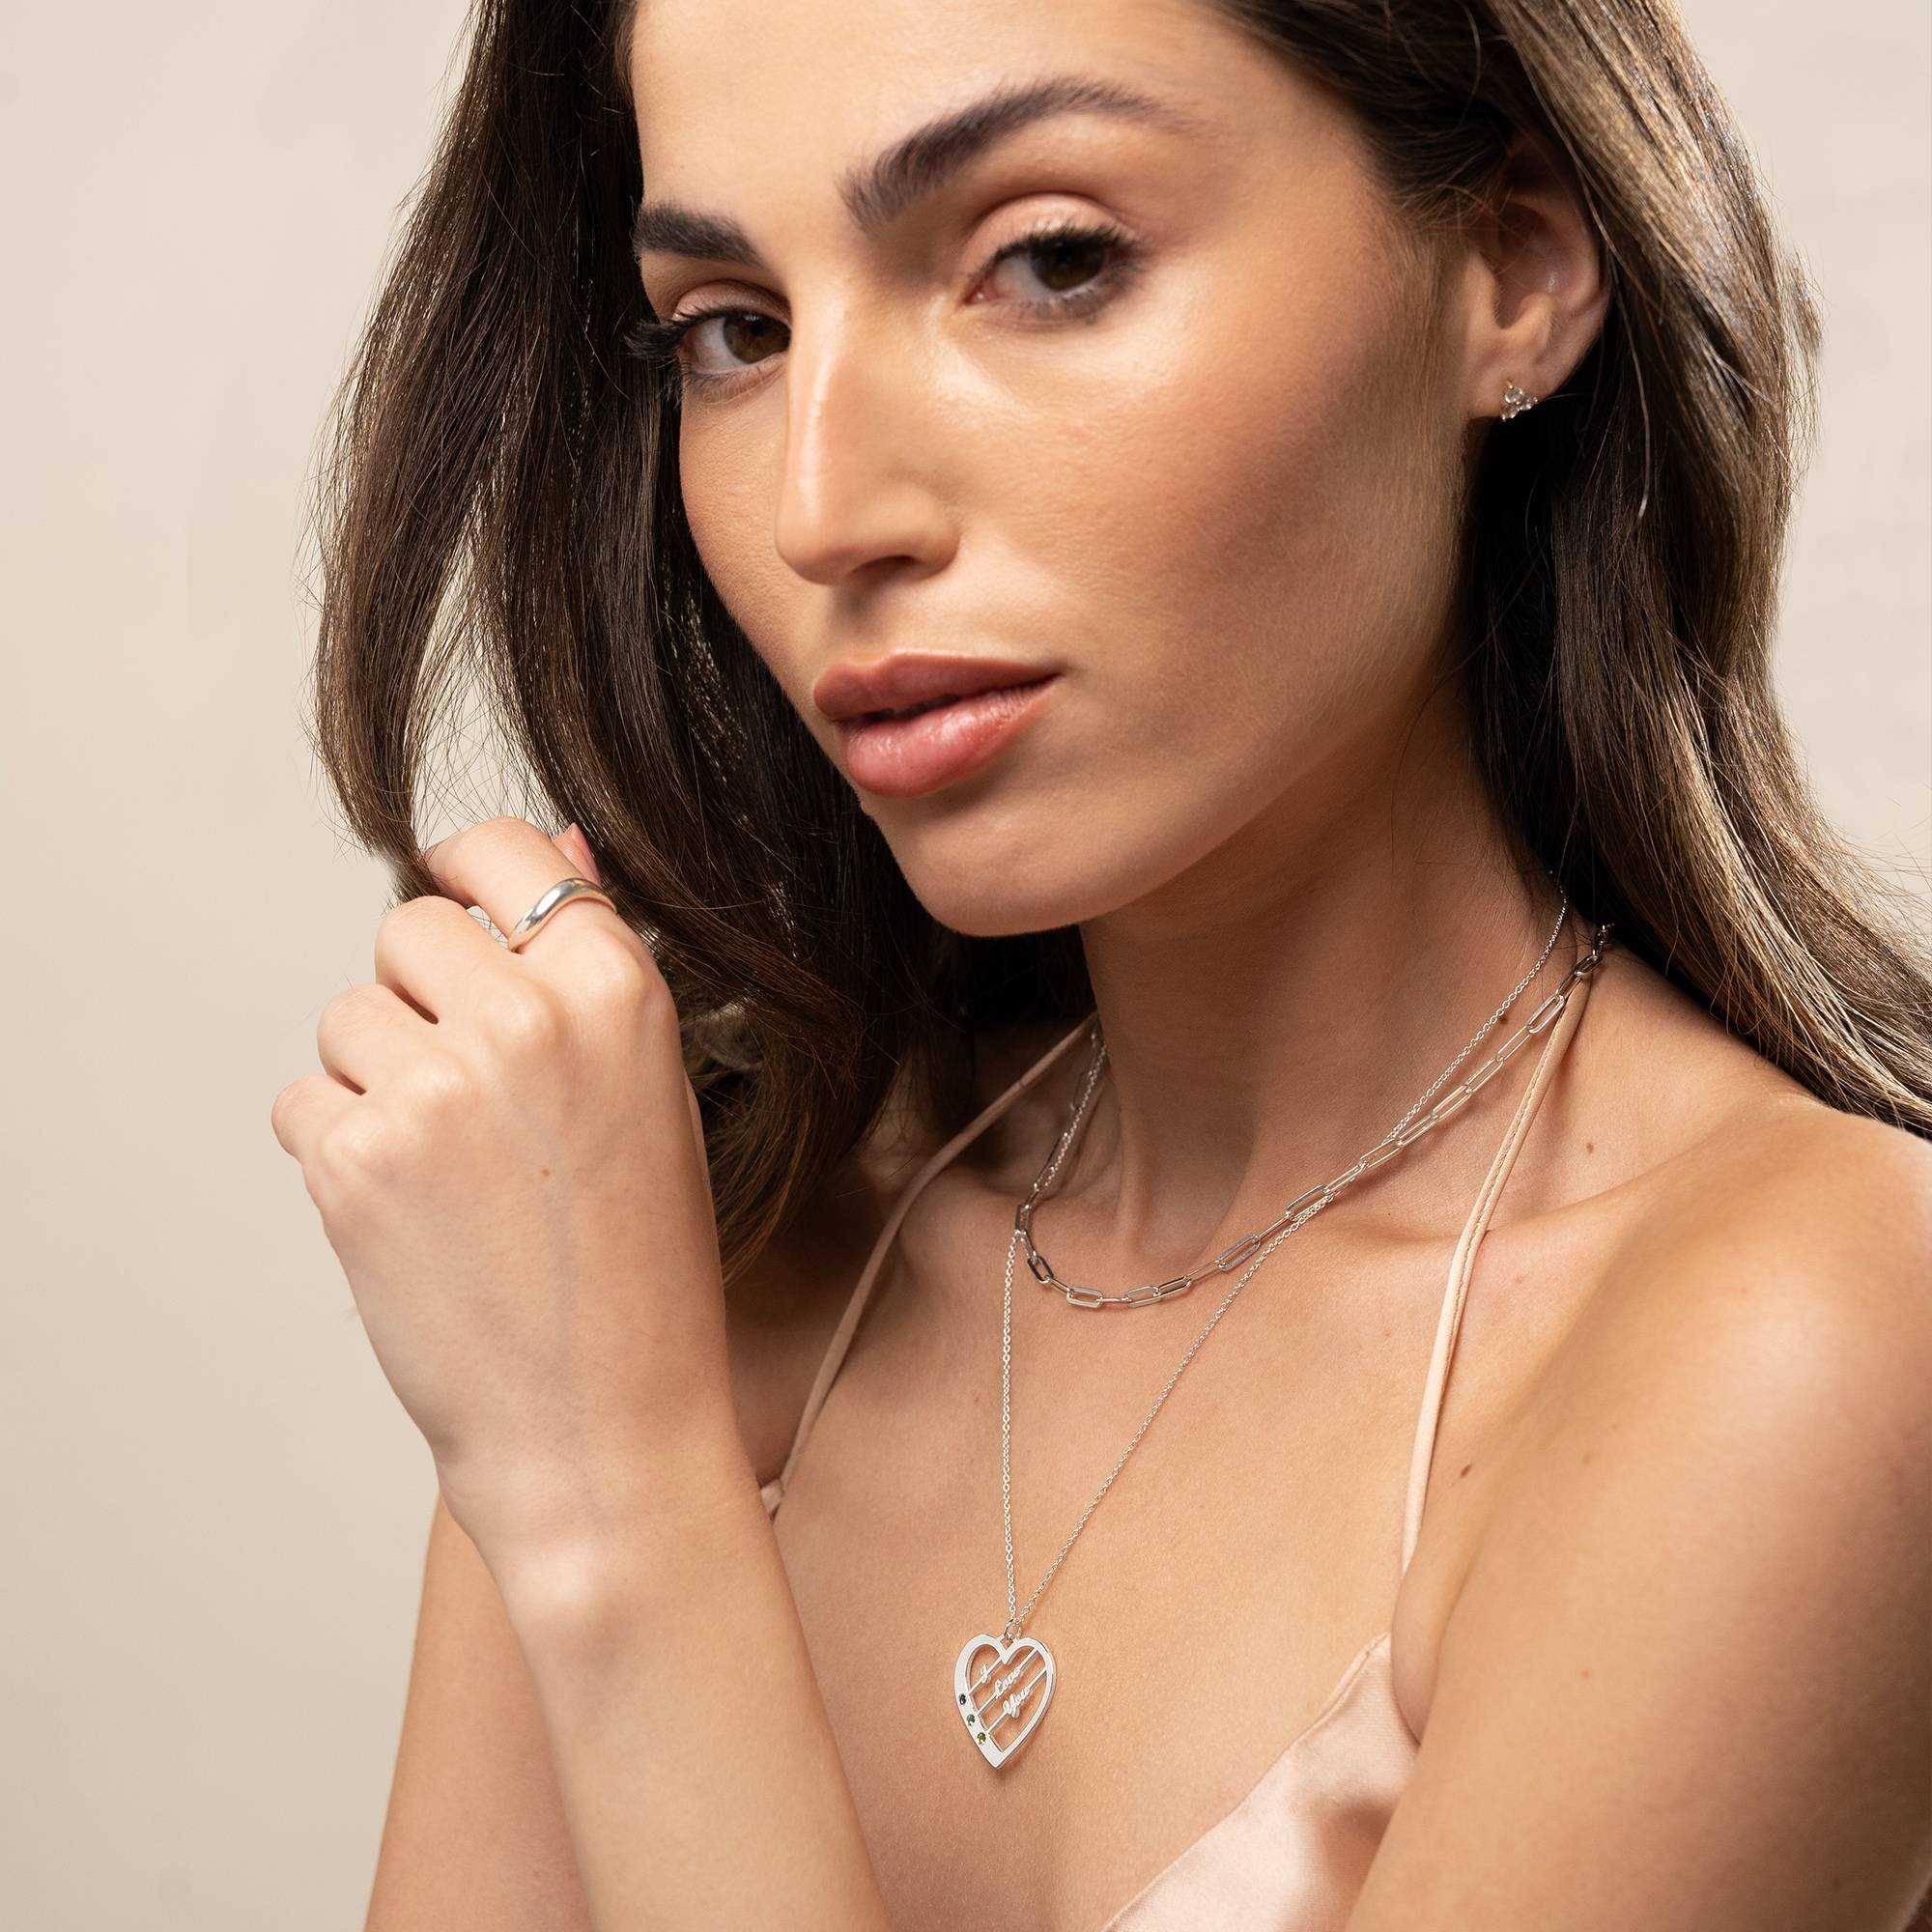 Ella Birthstone Heart Necklace with Names in 14K White Gold-1 product photo